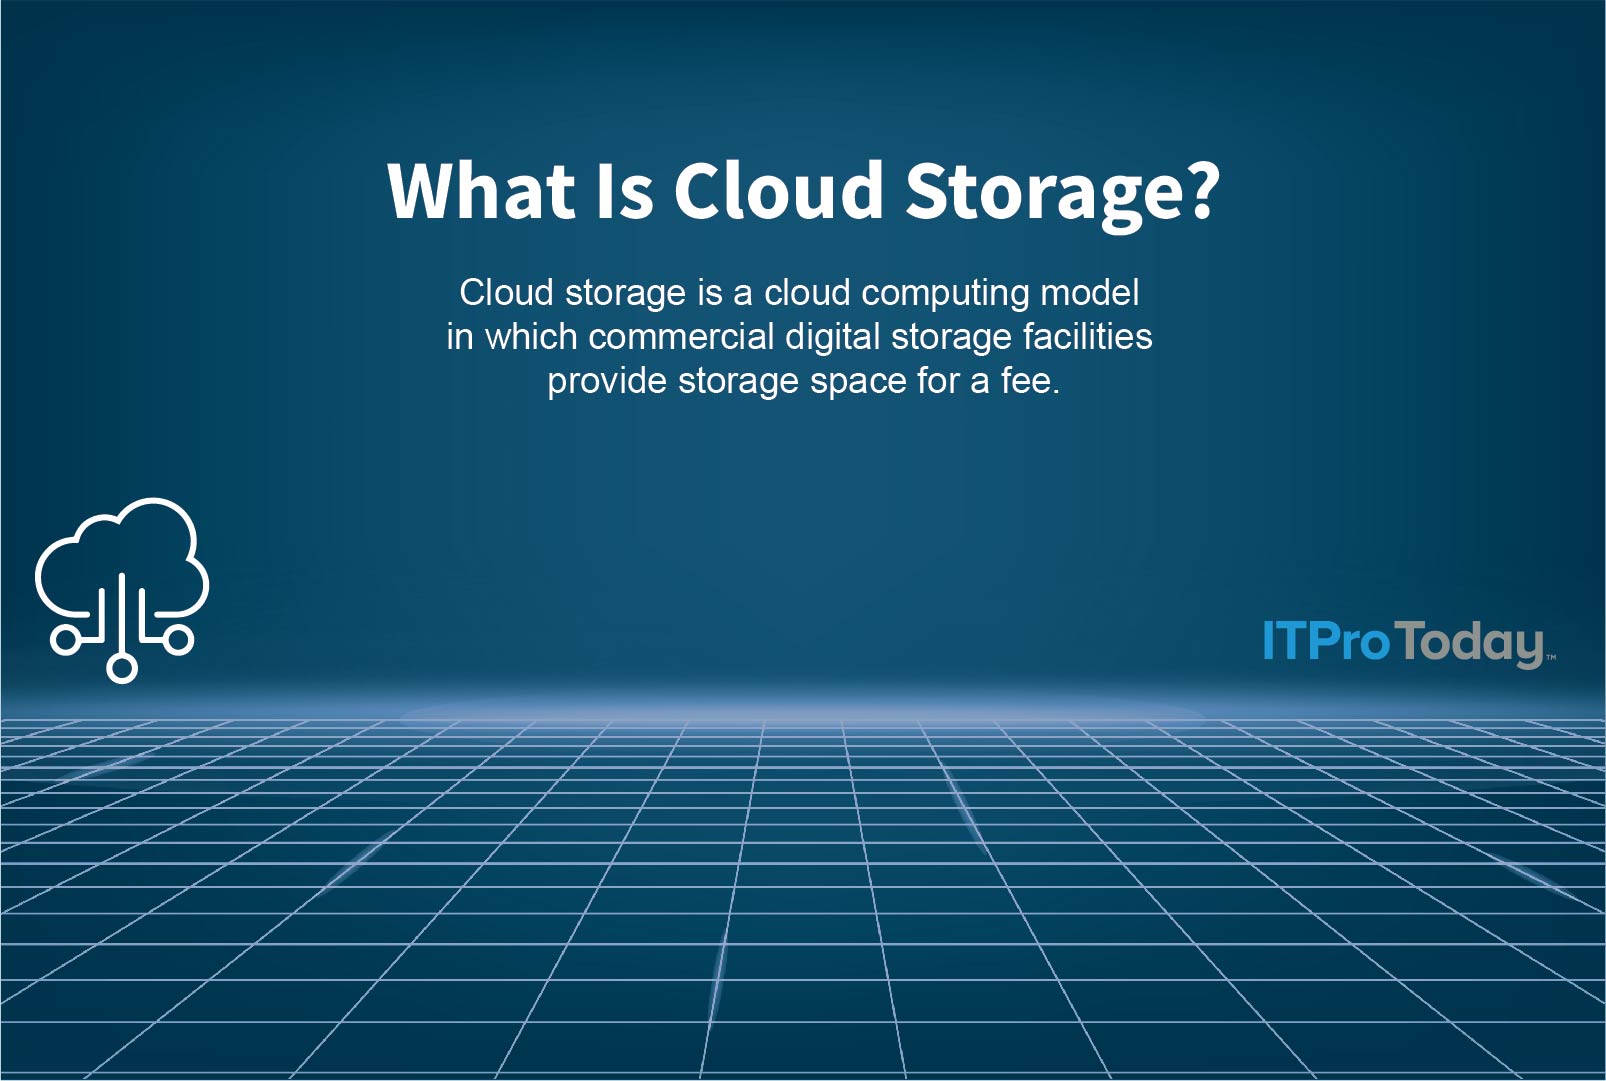 Cloud storage definition presented by ITPro Today